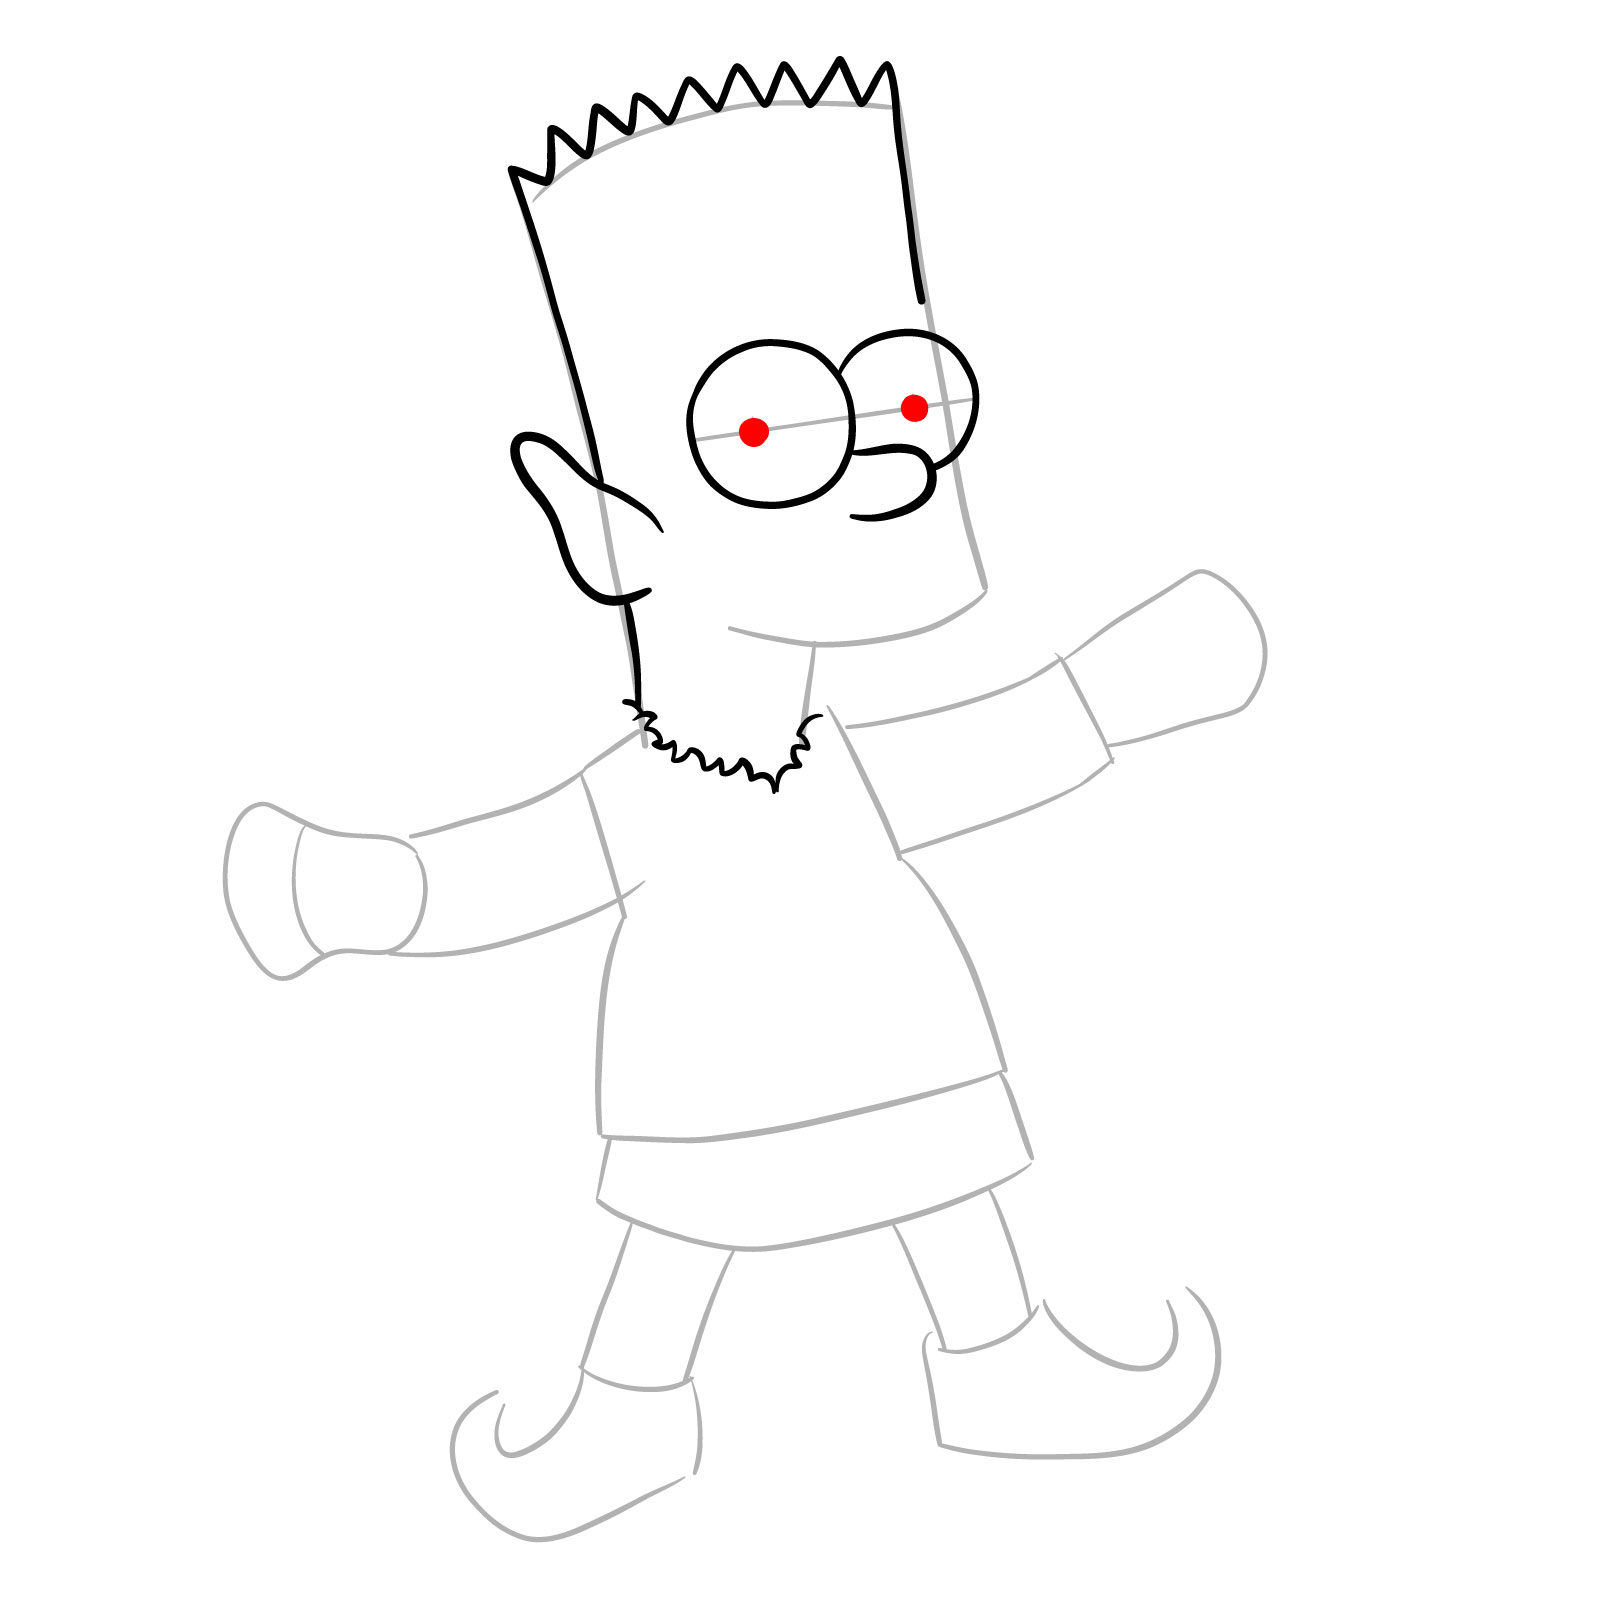 How to draw Bart Simpson as a Christmas Elf - step 10